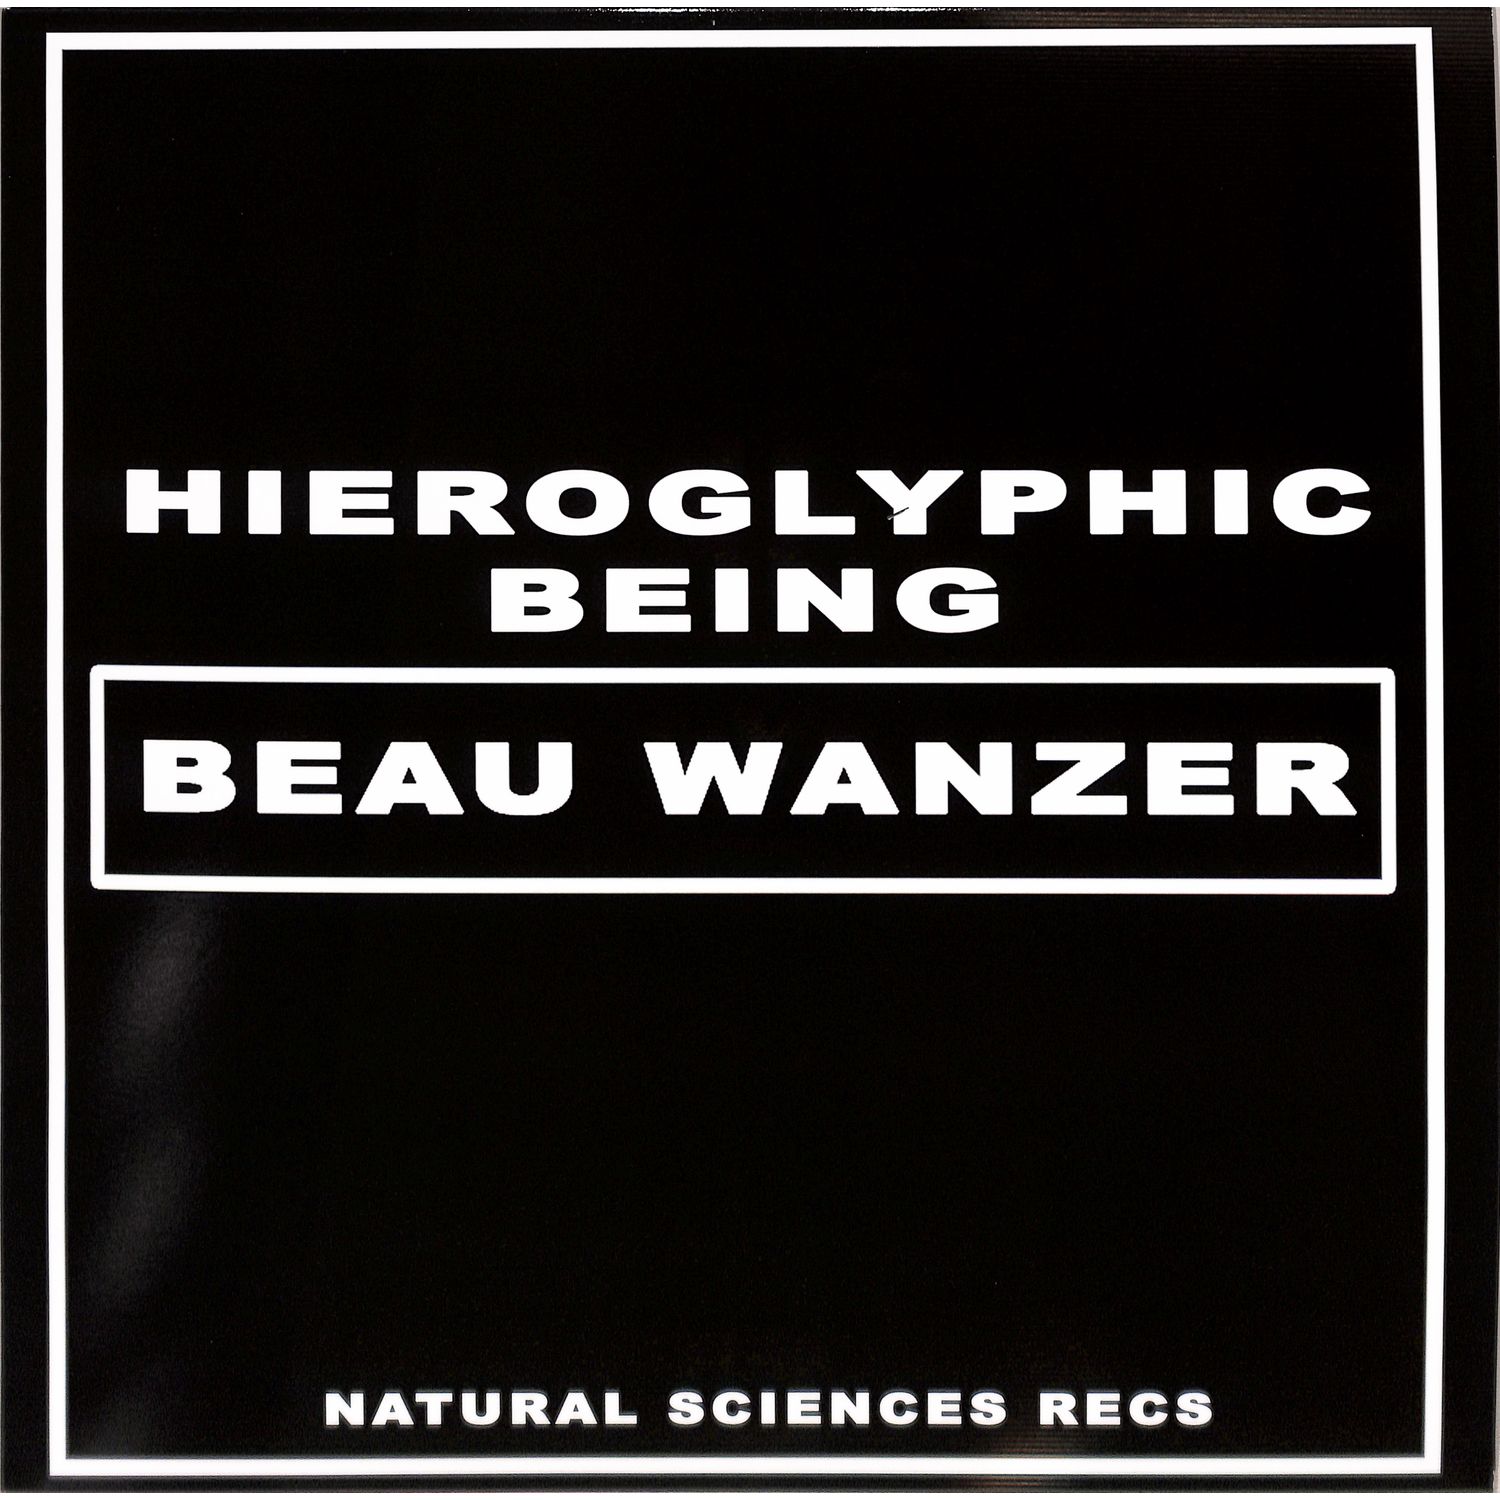 Beau Wanzer / Hieroglyphic Being - 4 DYAFUNCTIONAL PSYCHOTIC RELEASE & SONIC REPROGRAMMING PURPOSES ONLY